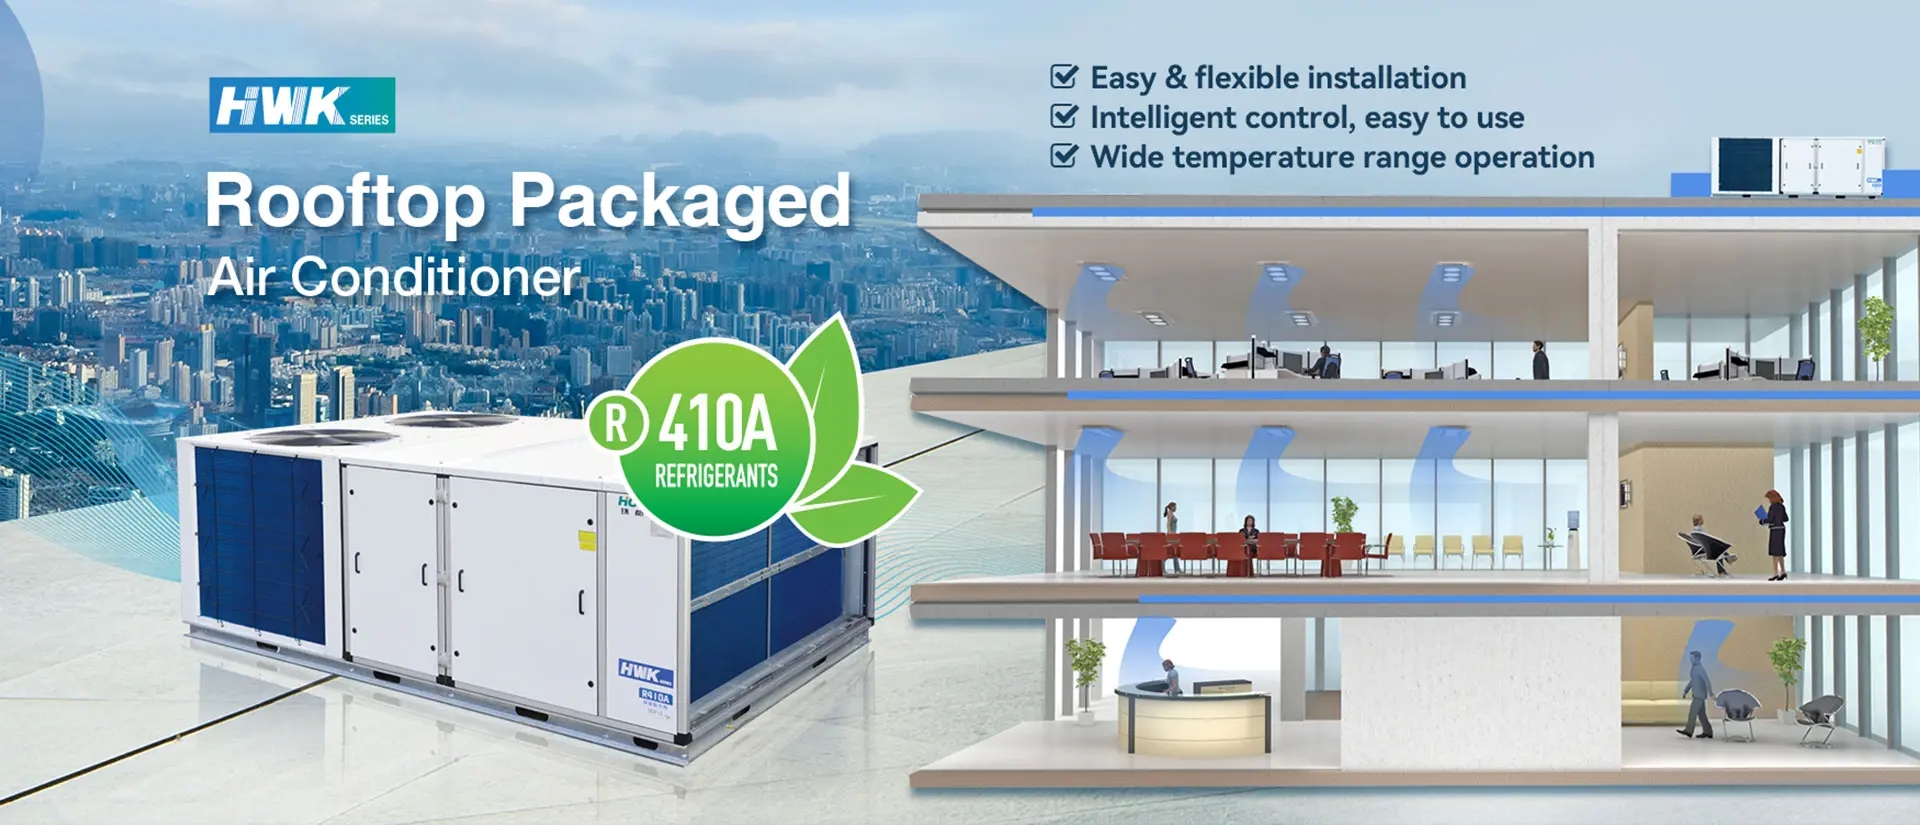 Holtop_Rooftop_Packaged_Air_Conditioner